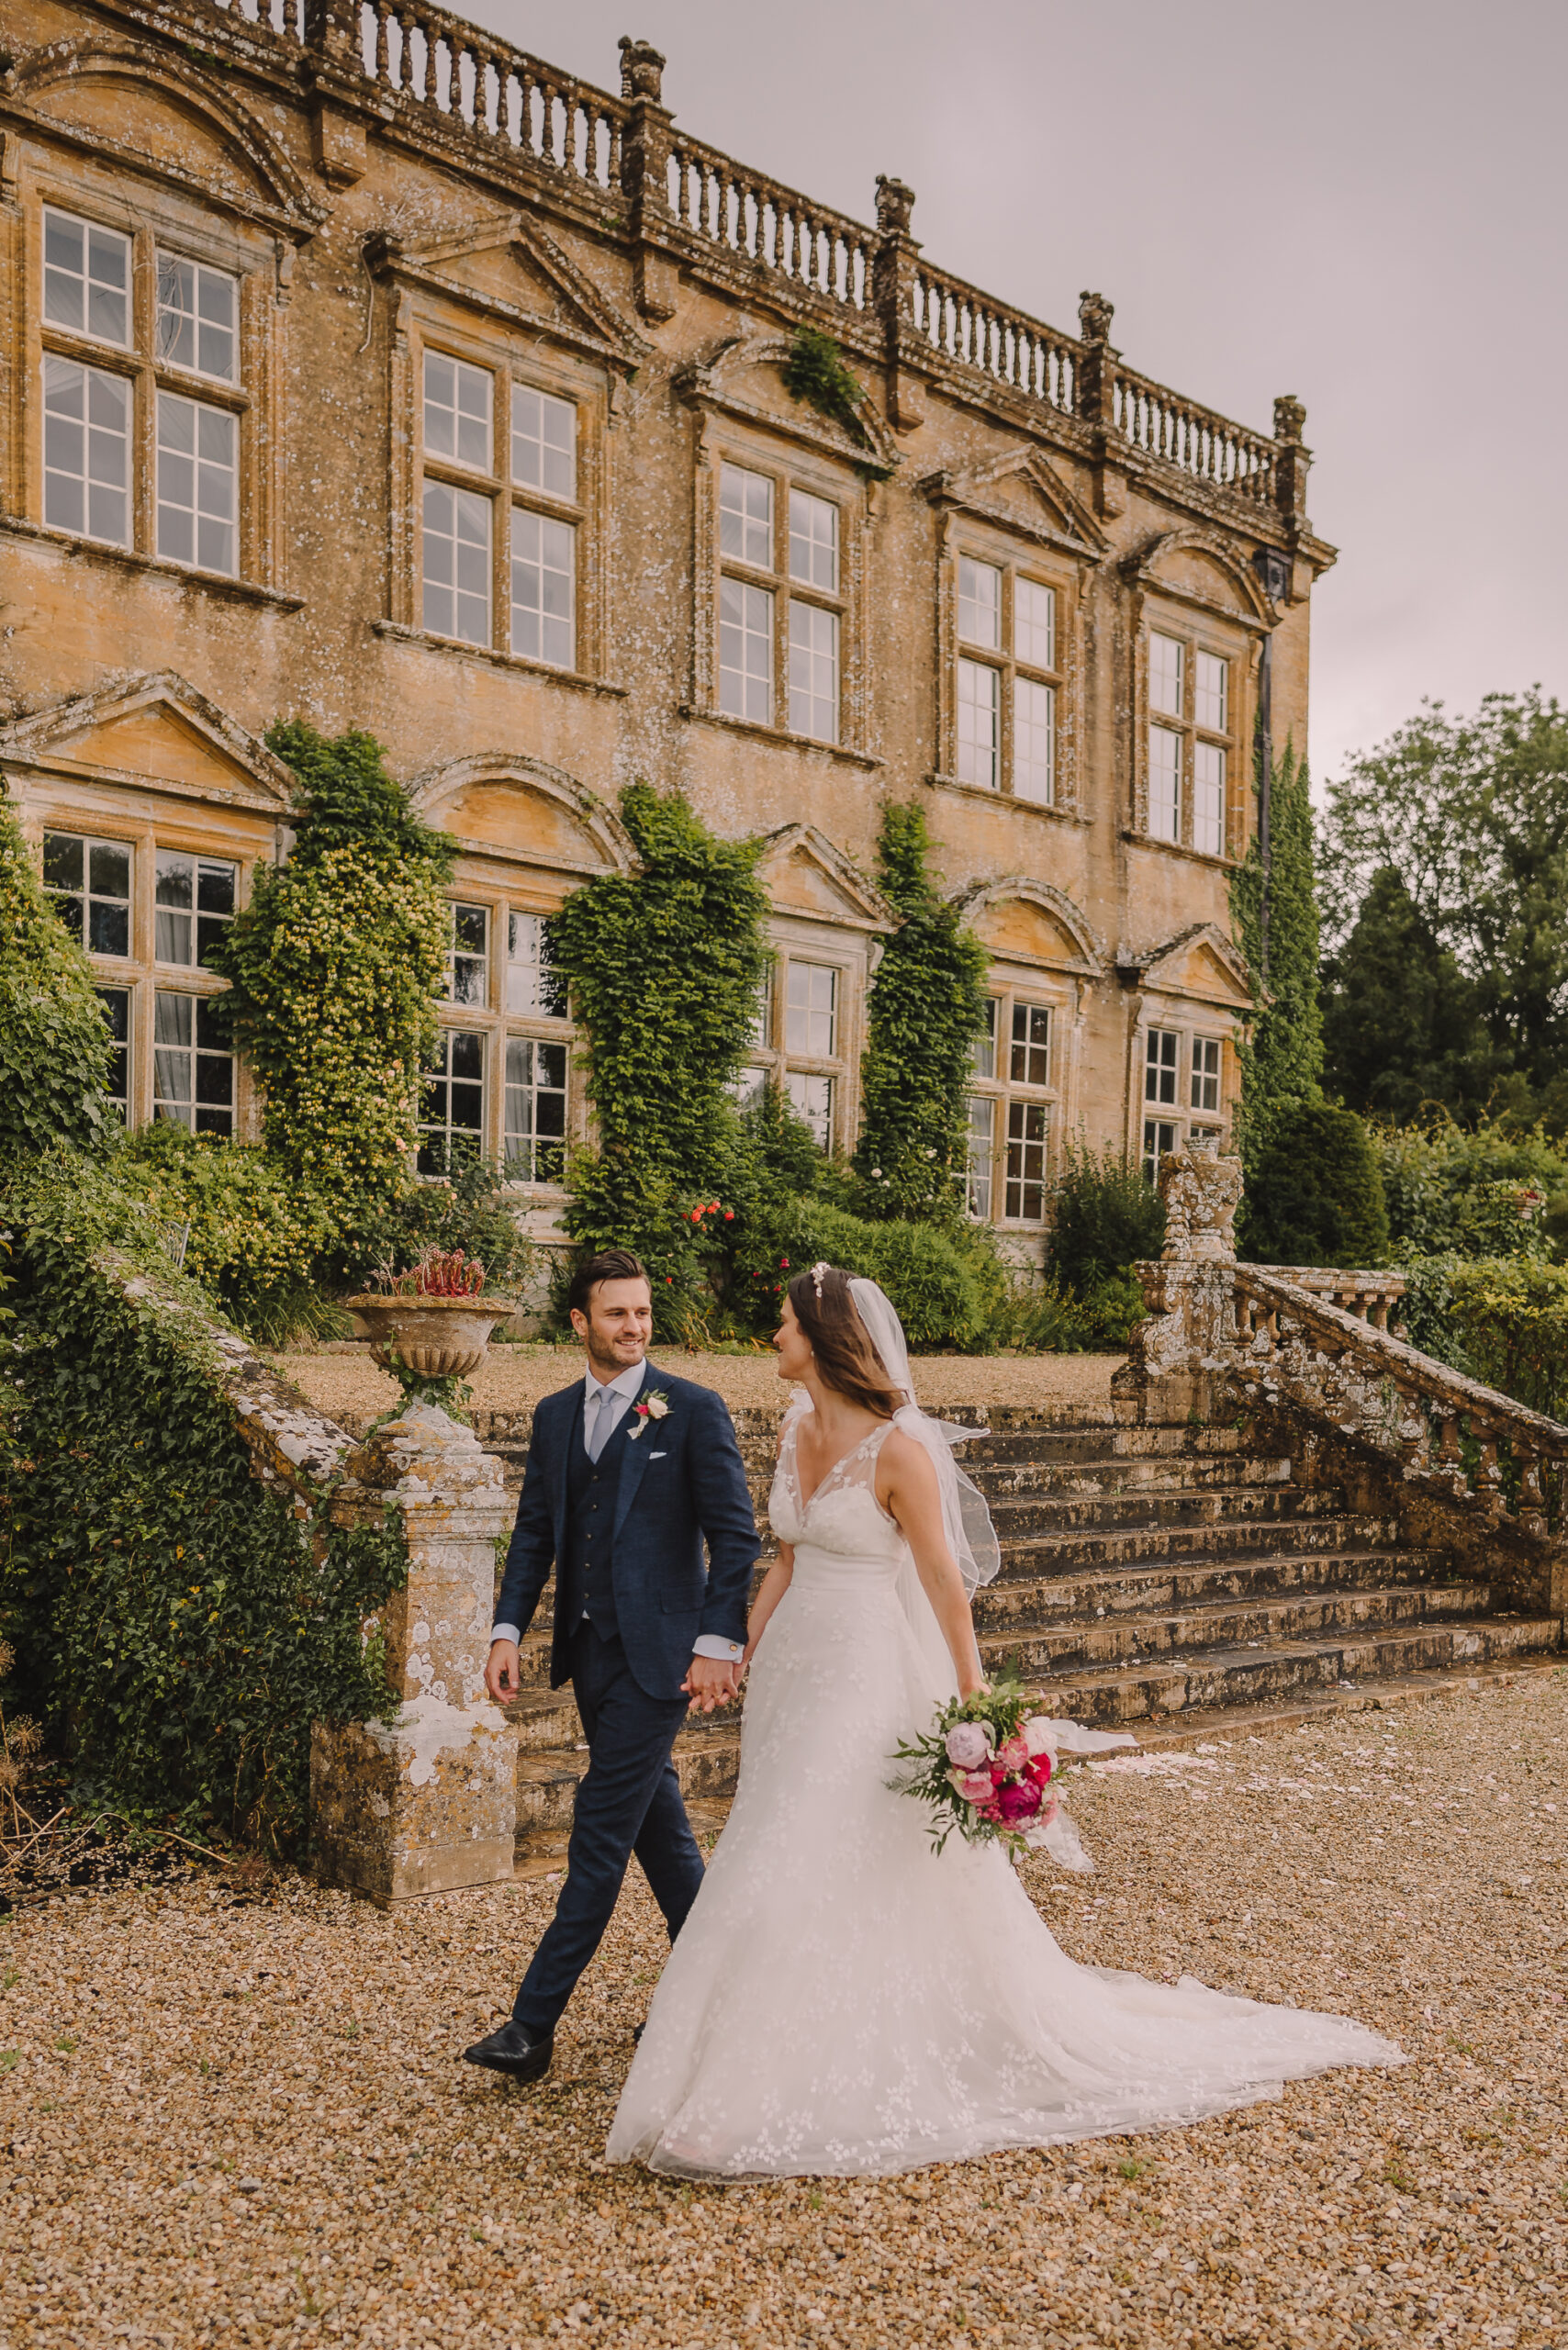 Brympton House wedding florist Flourish and Grace with Modern Vintage Photography somerset manor house country wedding venue wedding weekend